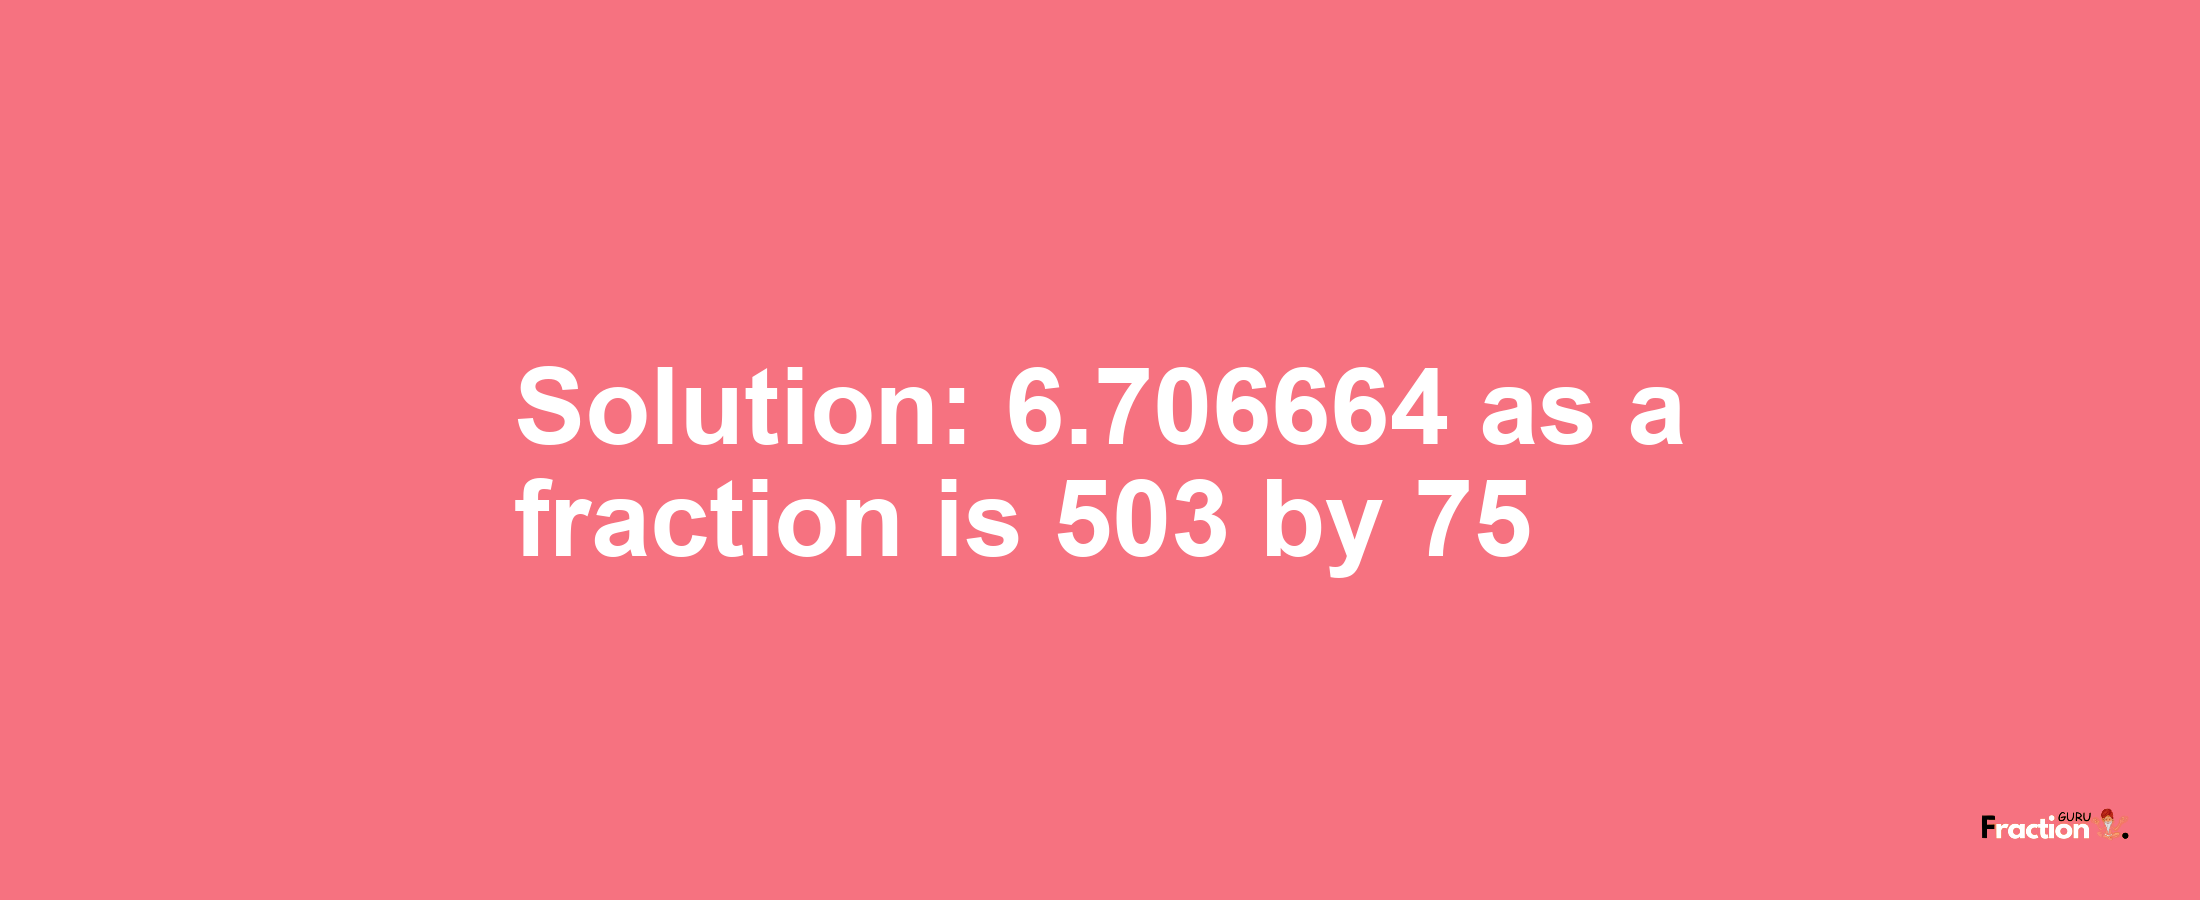 Solution:6.706664 as a fraction is 503/75